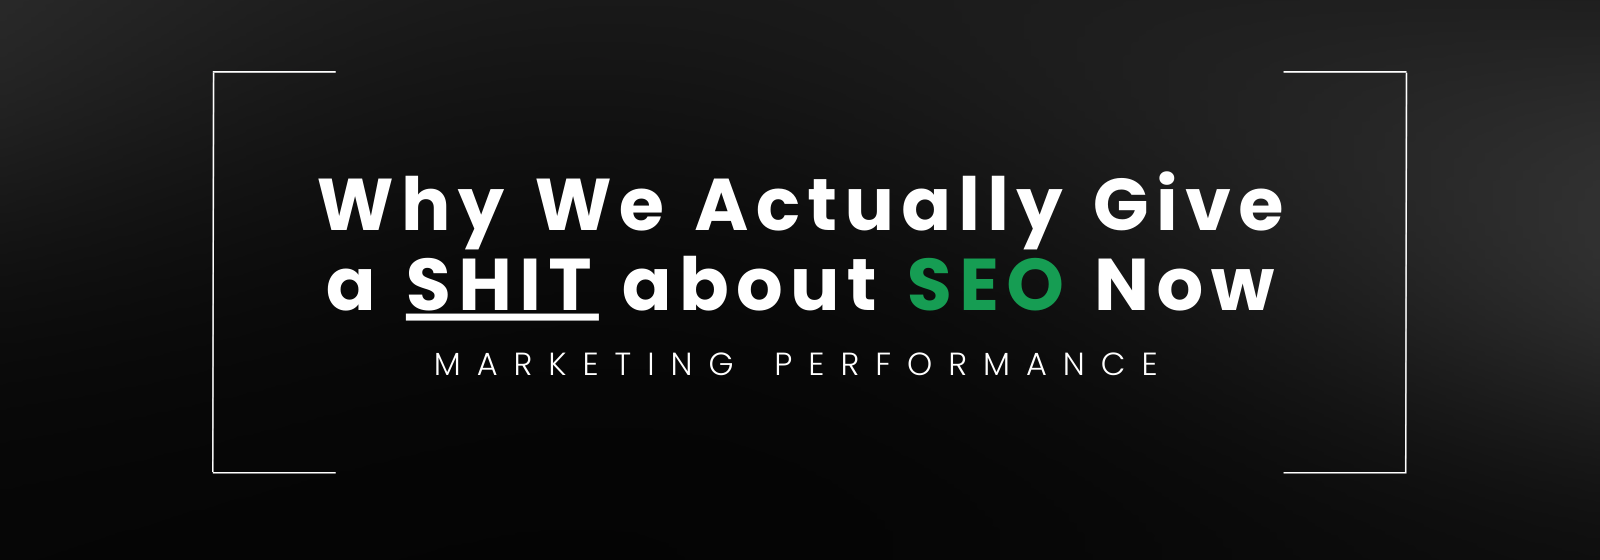 Why We Actually Give a SHIT about SEO Now...